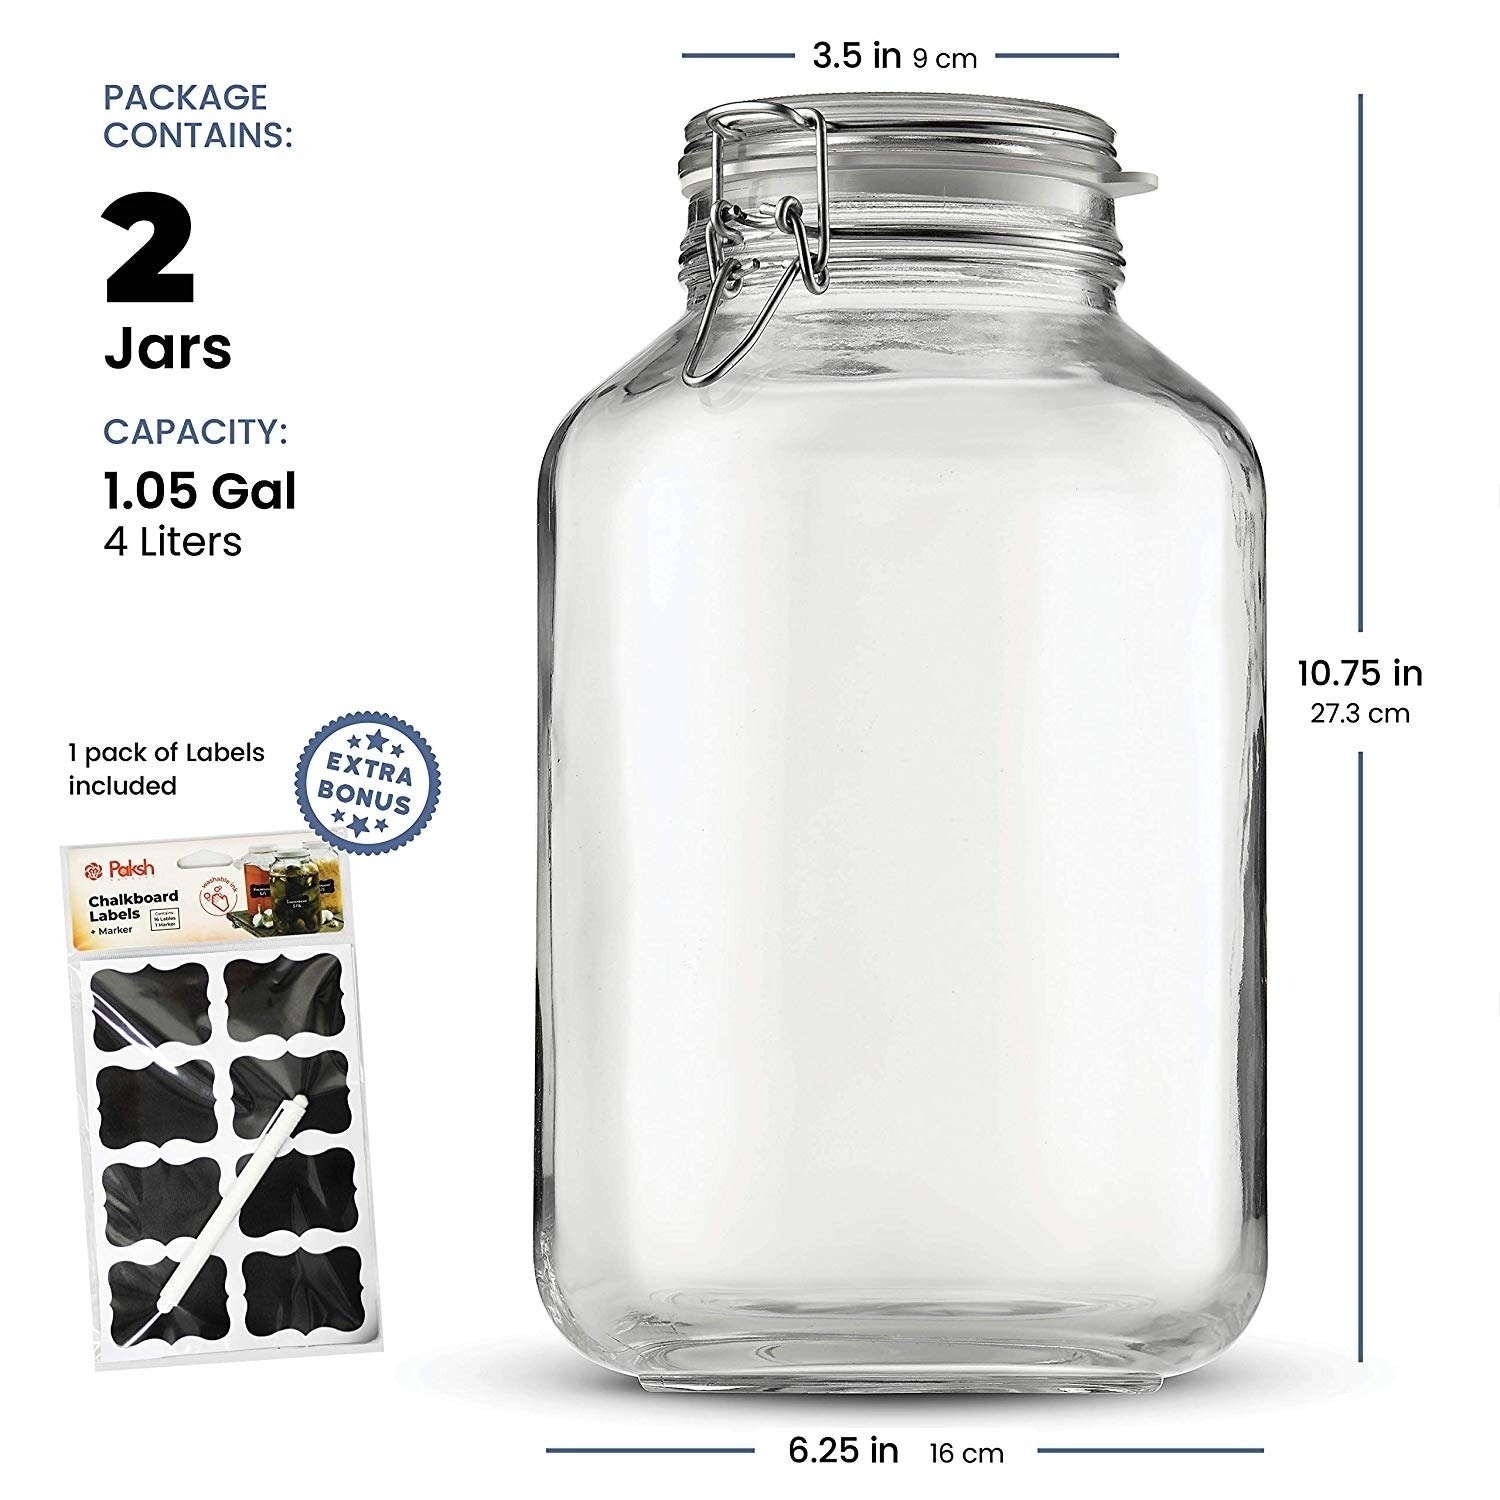 https://ak1.ostkcdn.com/images/products/29043351/Bormioli-Rocco-Glass-Fido-Jars-135.75-Oz-4-Liter-Airtight-lid-for-Fermenting-Preserving-With-Chalkboard-Labels-2-Pack-78aa790d-4241-414e-81c5-4f7a4c28bb1a.jpg